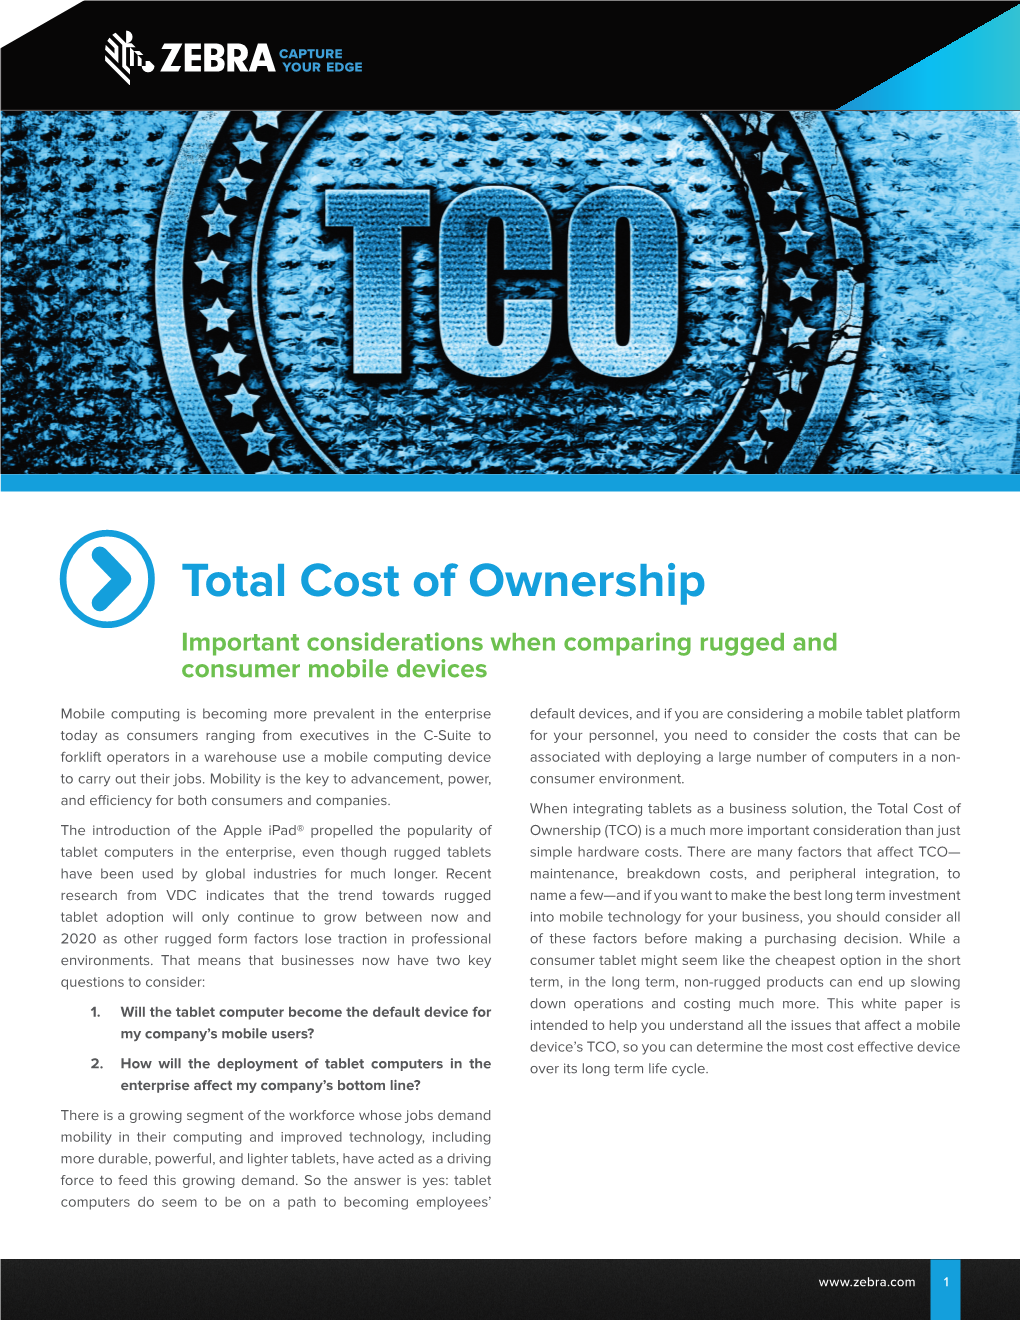 Total Cost of Ownership Important Considerations When Comparing Rugged and Consumer Mobile Devices